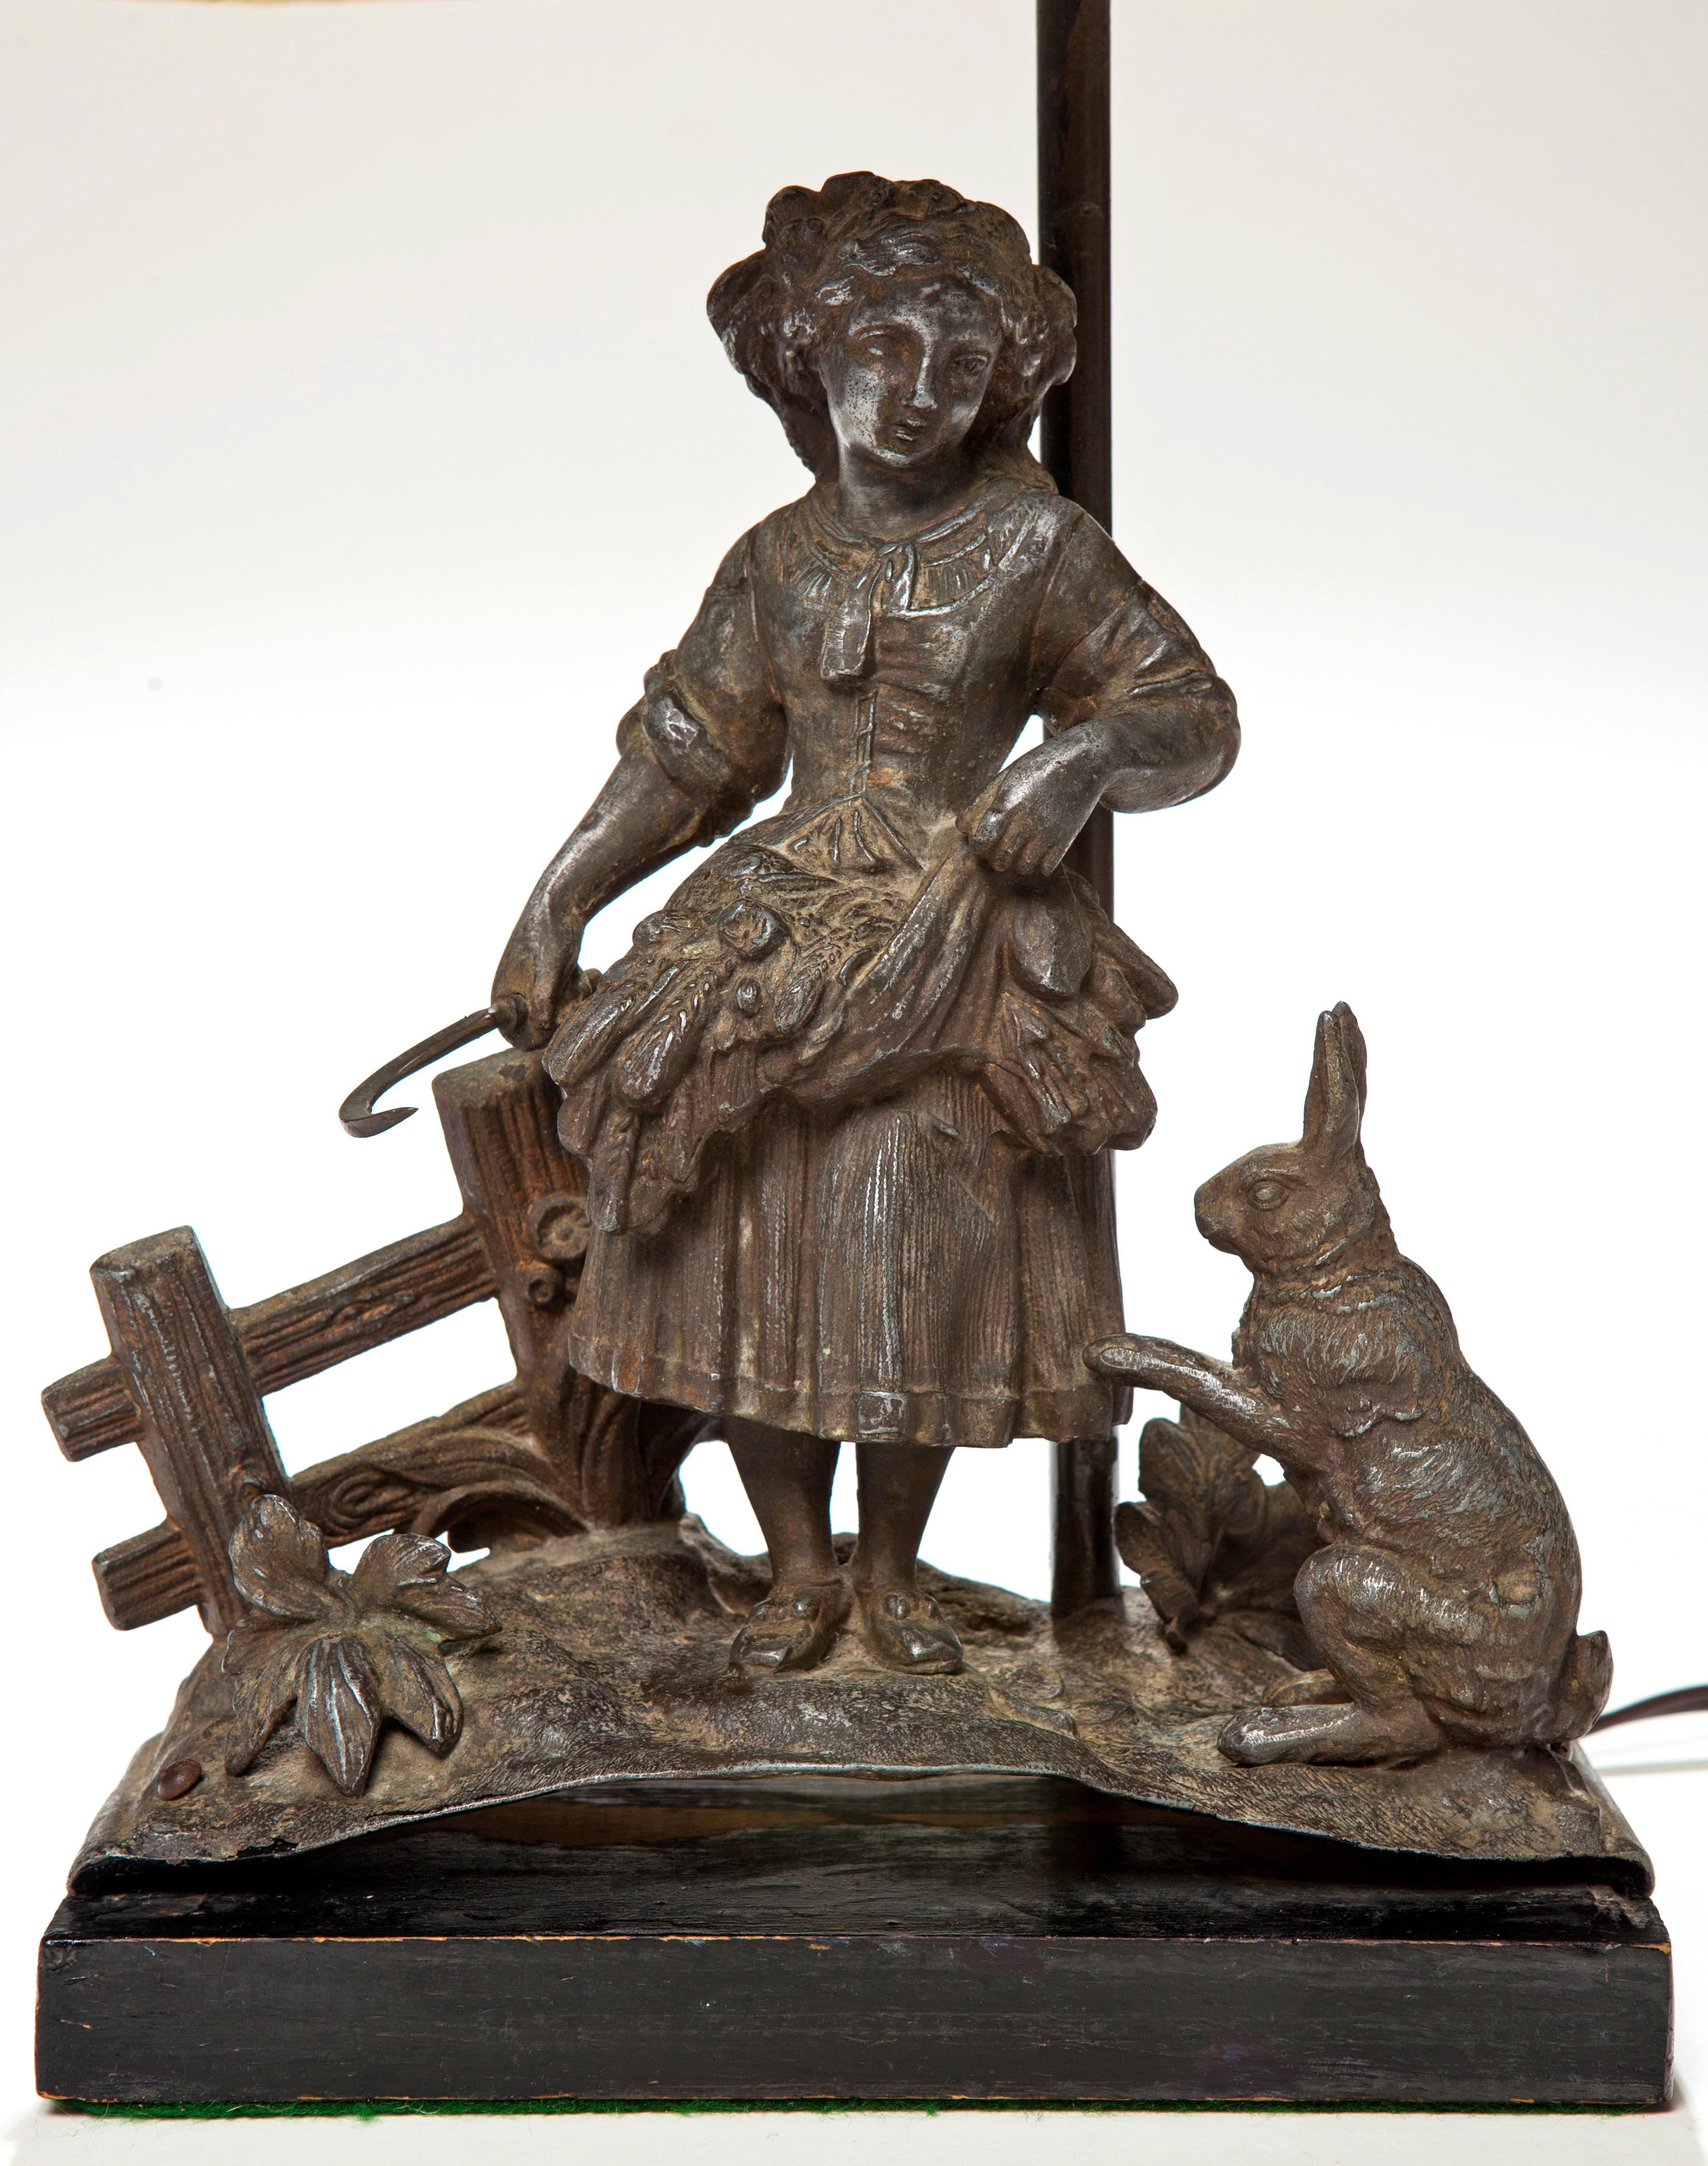 Adorable antique lamp of a young girl holding a basket of wheat with a sickle and a bunny rabbit sitting next to her. Super special and most likely this was an early sculpture that was made into a lamp. Metal has a washed steel look to it, with